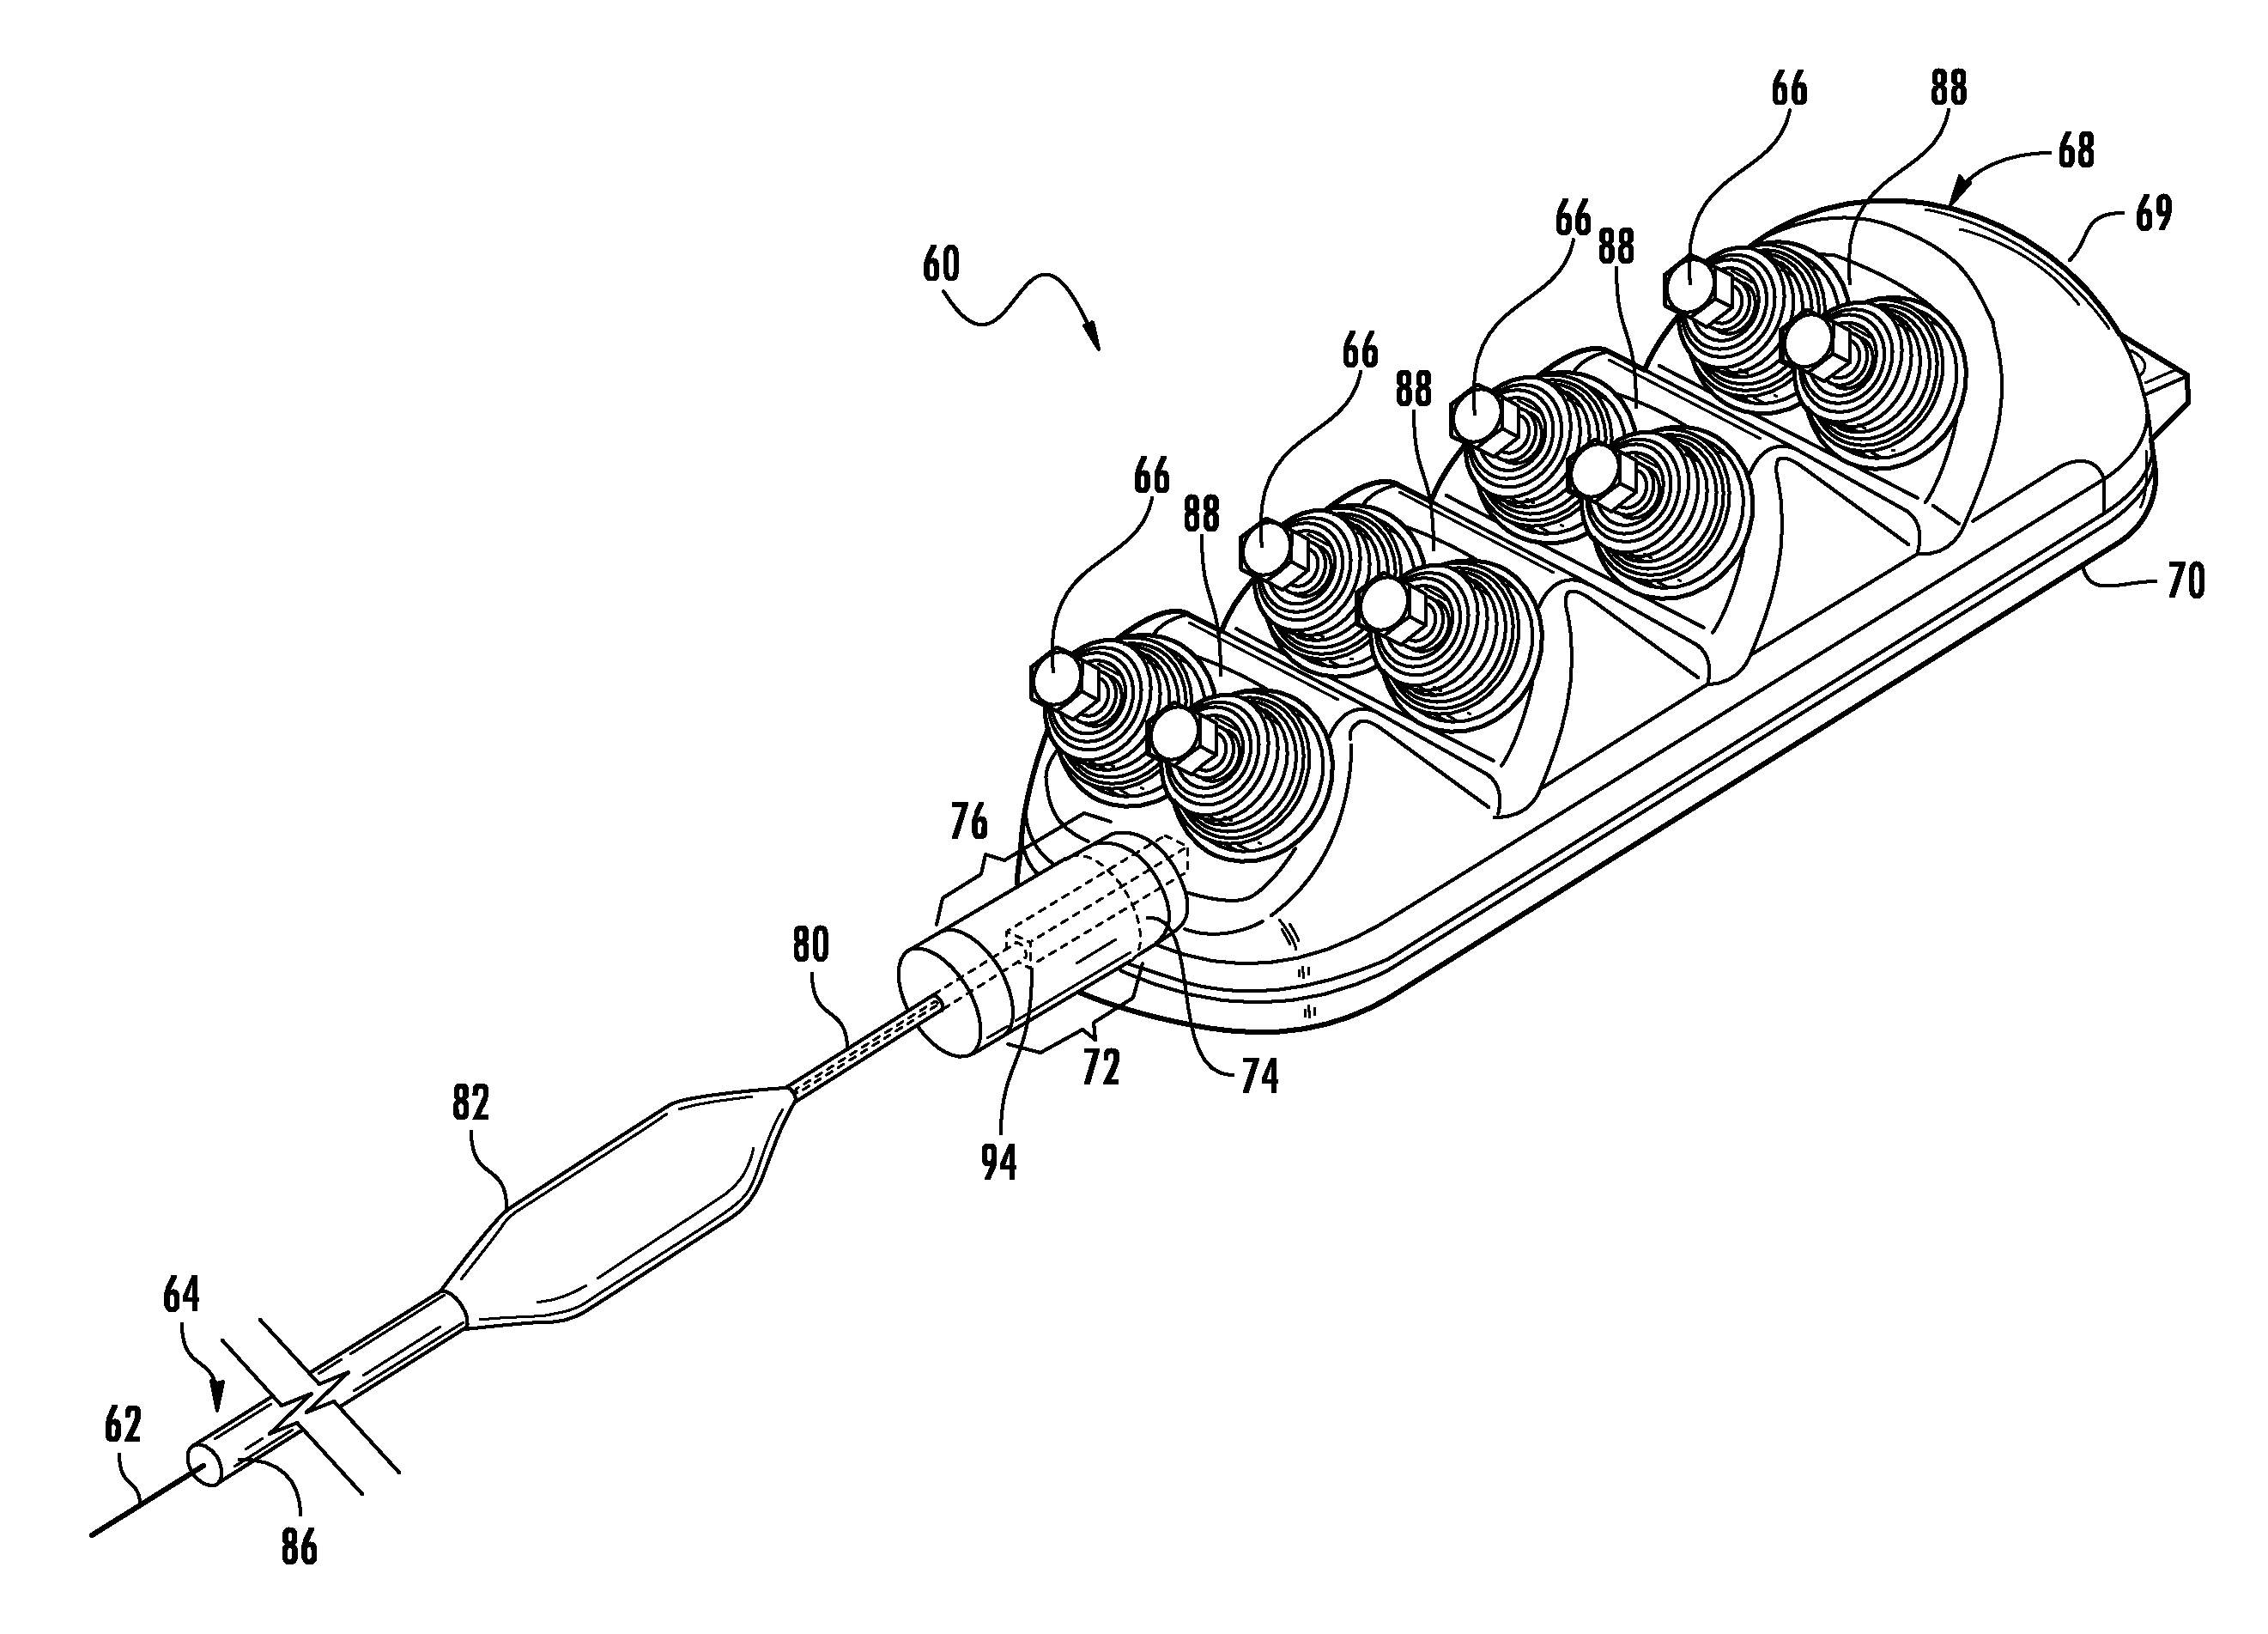 Multi-port optical connection terminal assemblies supporting optical signal splitting, and related terminals and methods